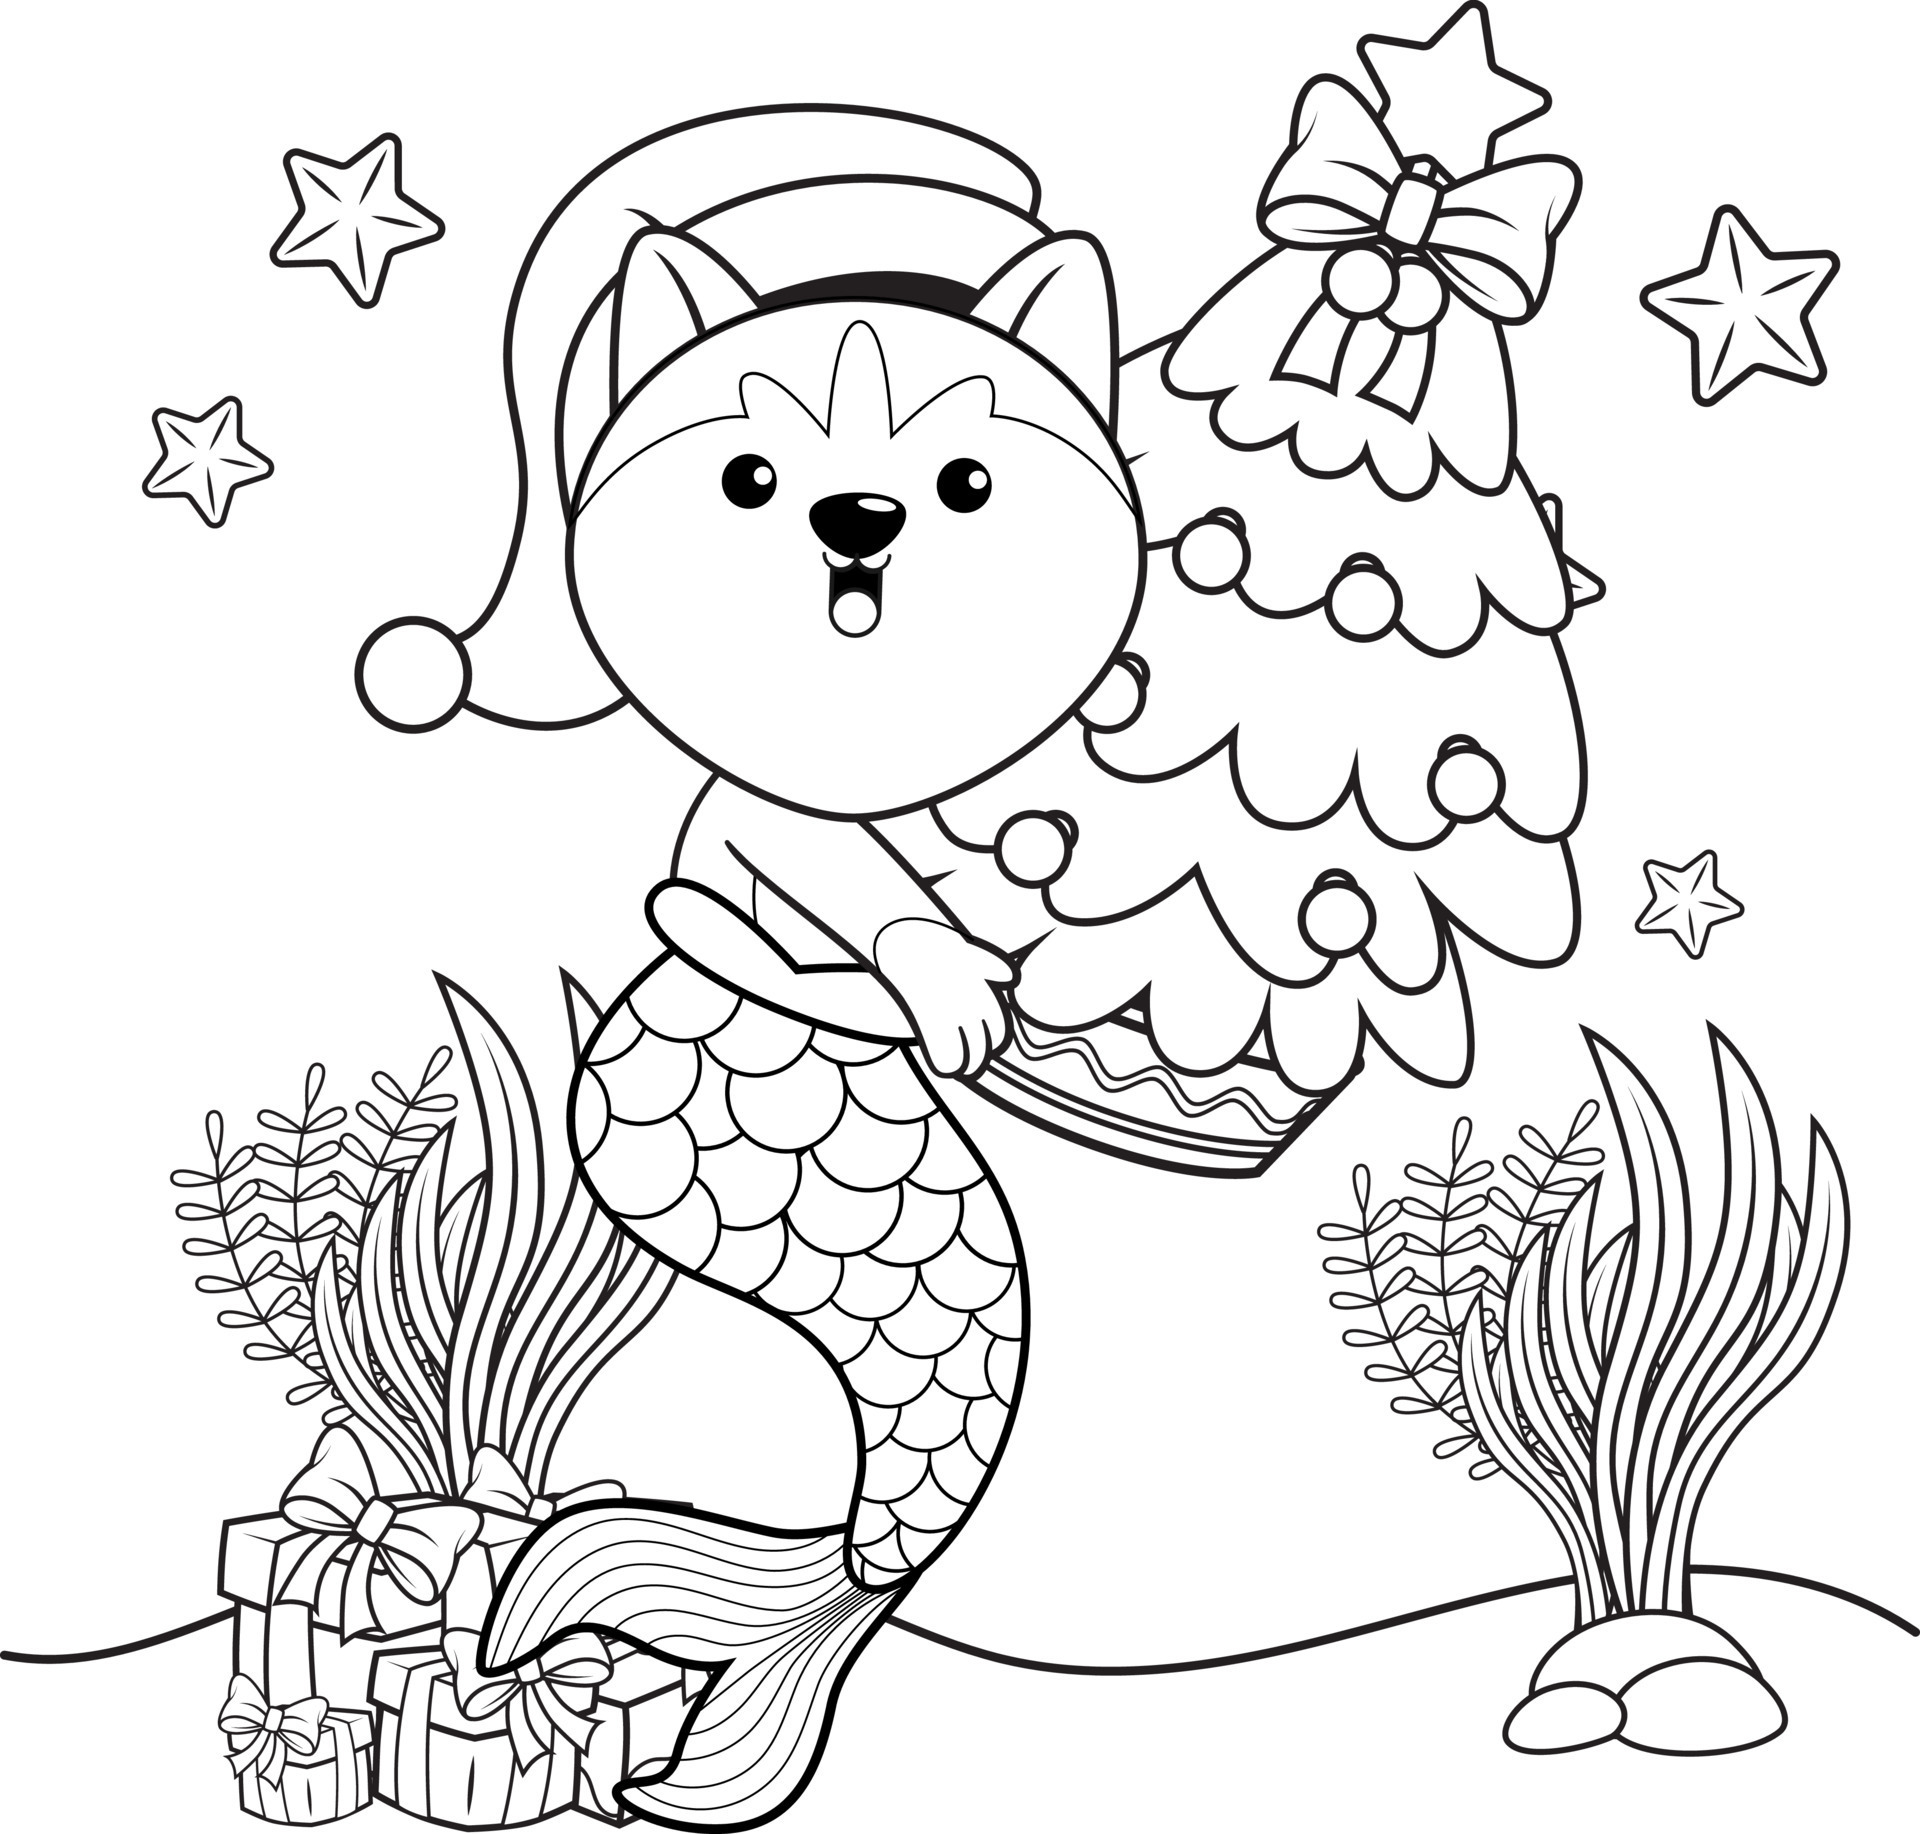 Christmas coloring book with cute husky mermaid 19672377 Vector Art at